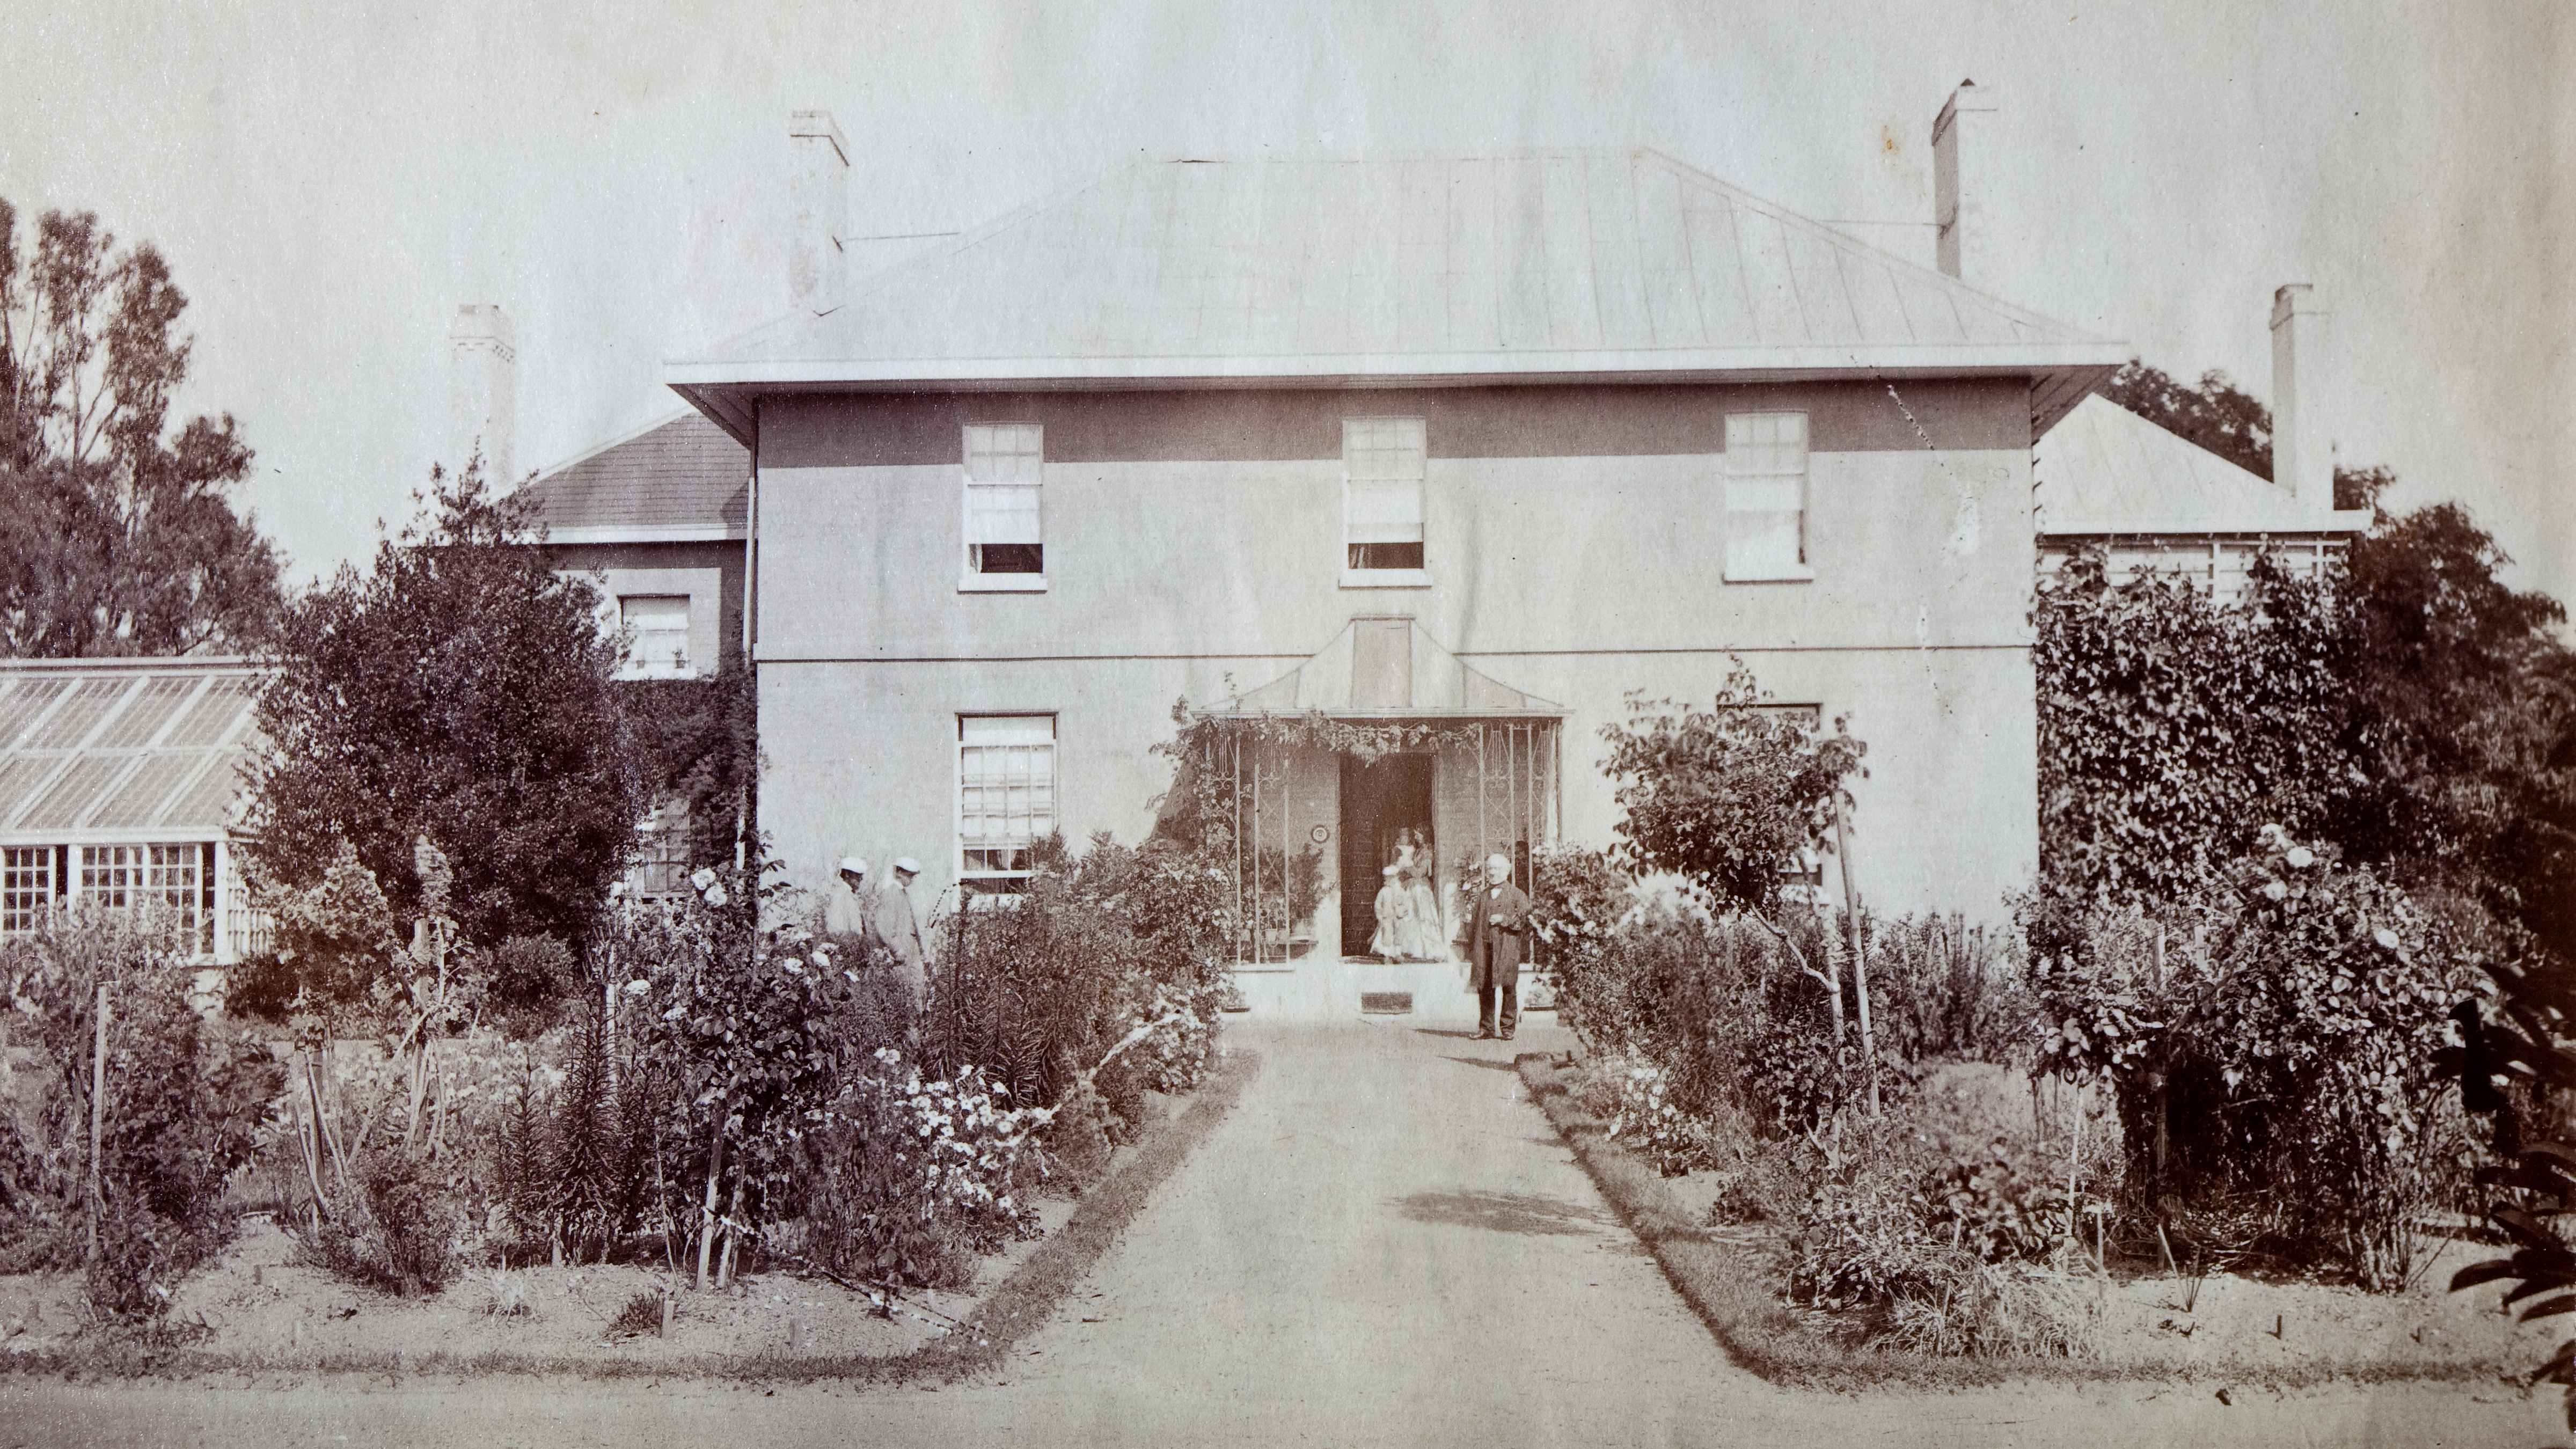 Brickendon Georgian homestead with the first William Archer standing in front of house and family members in the background. Rose gardens with a path in the centre, lead to the house with a greenhouse to the left. Source:Brickendon Estate Archive.